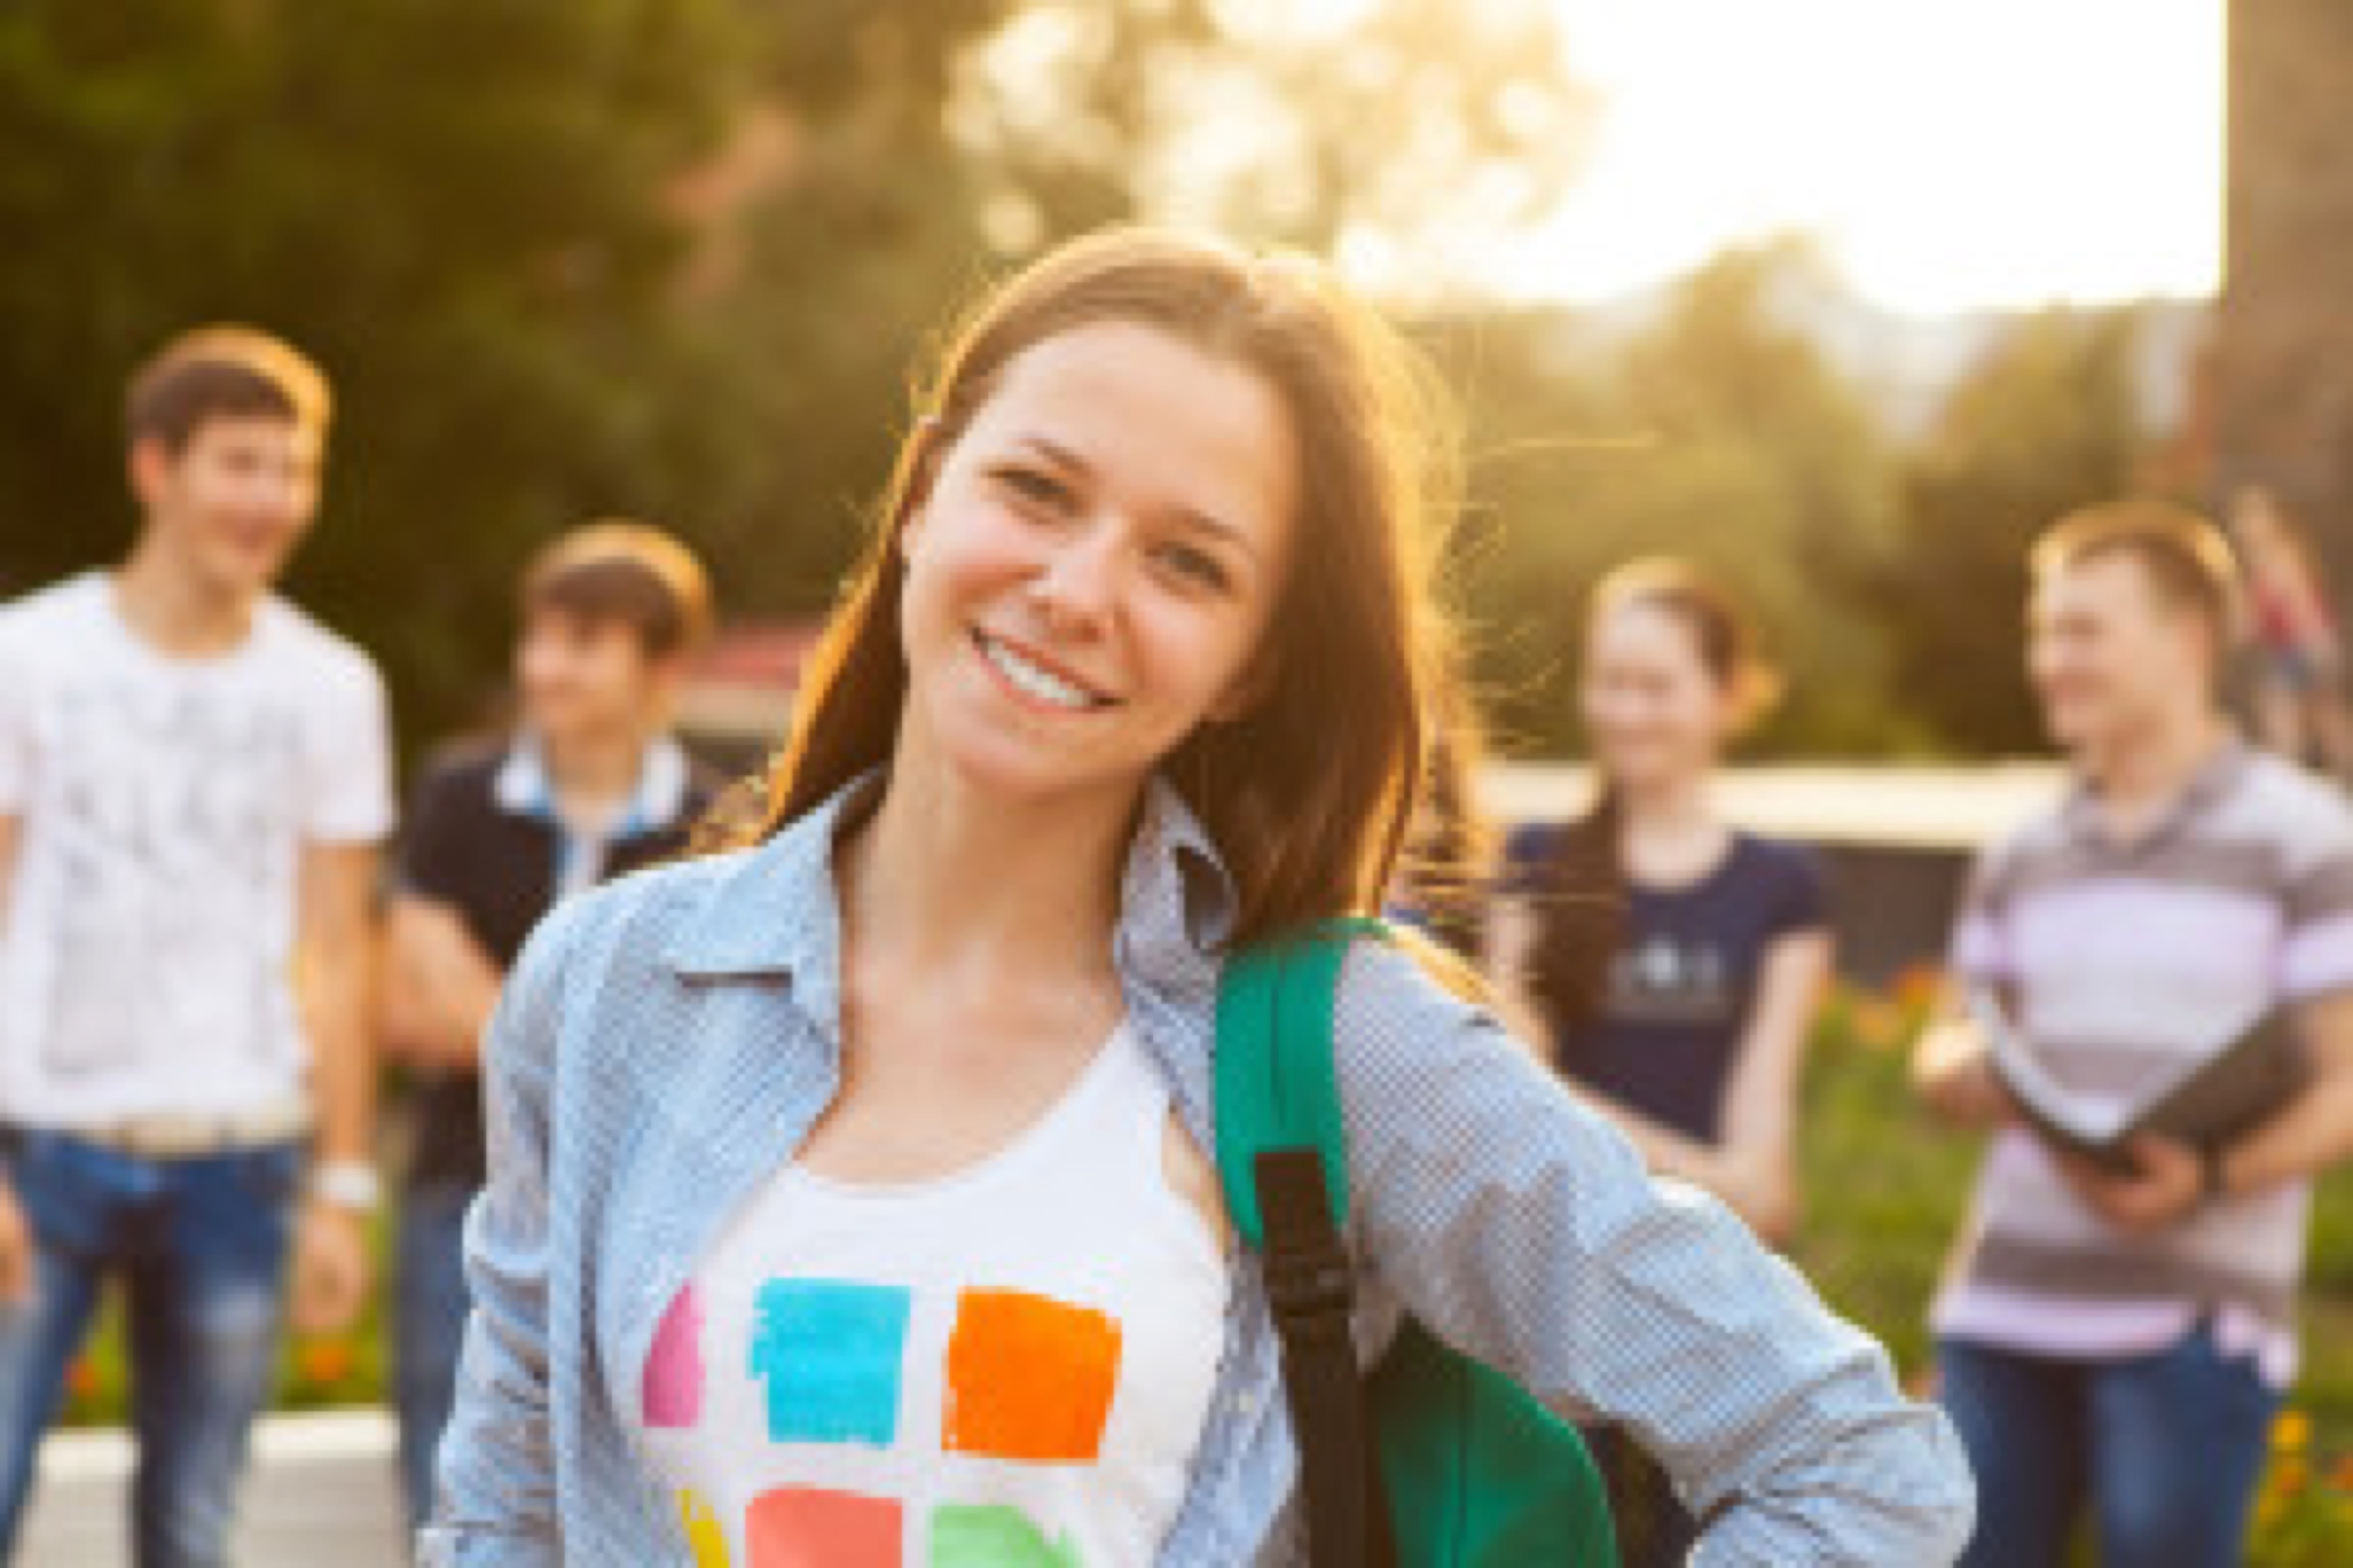 Female smiling student outdoors in the evening with friends